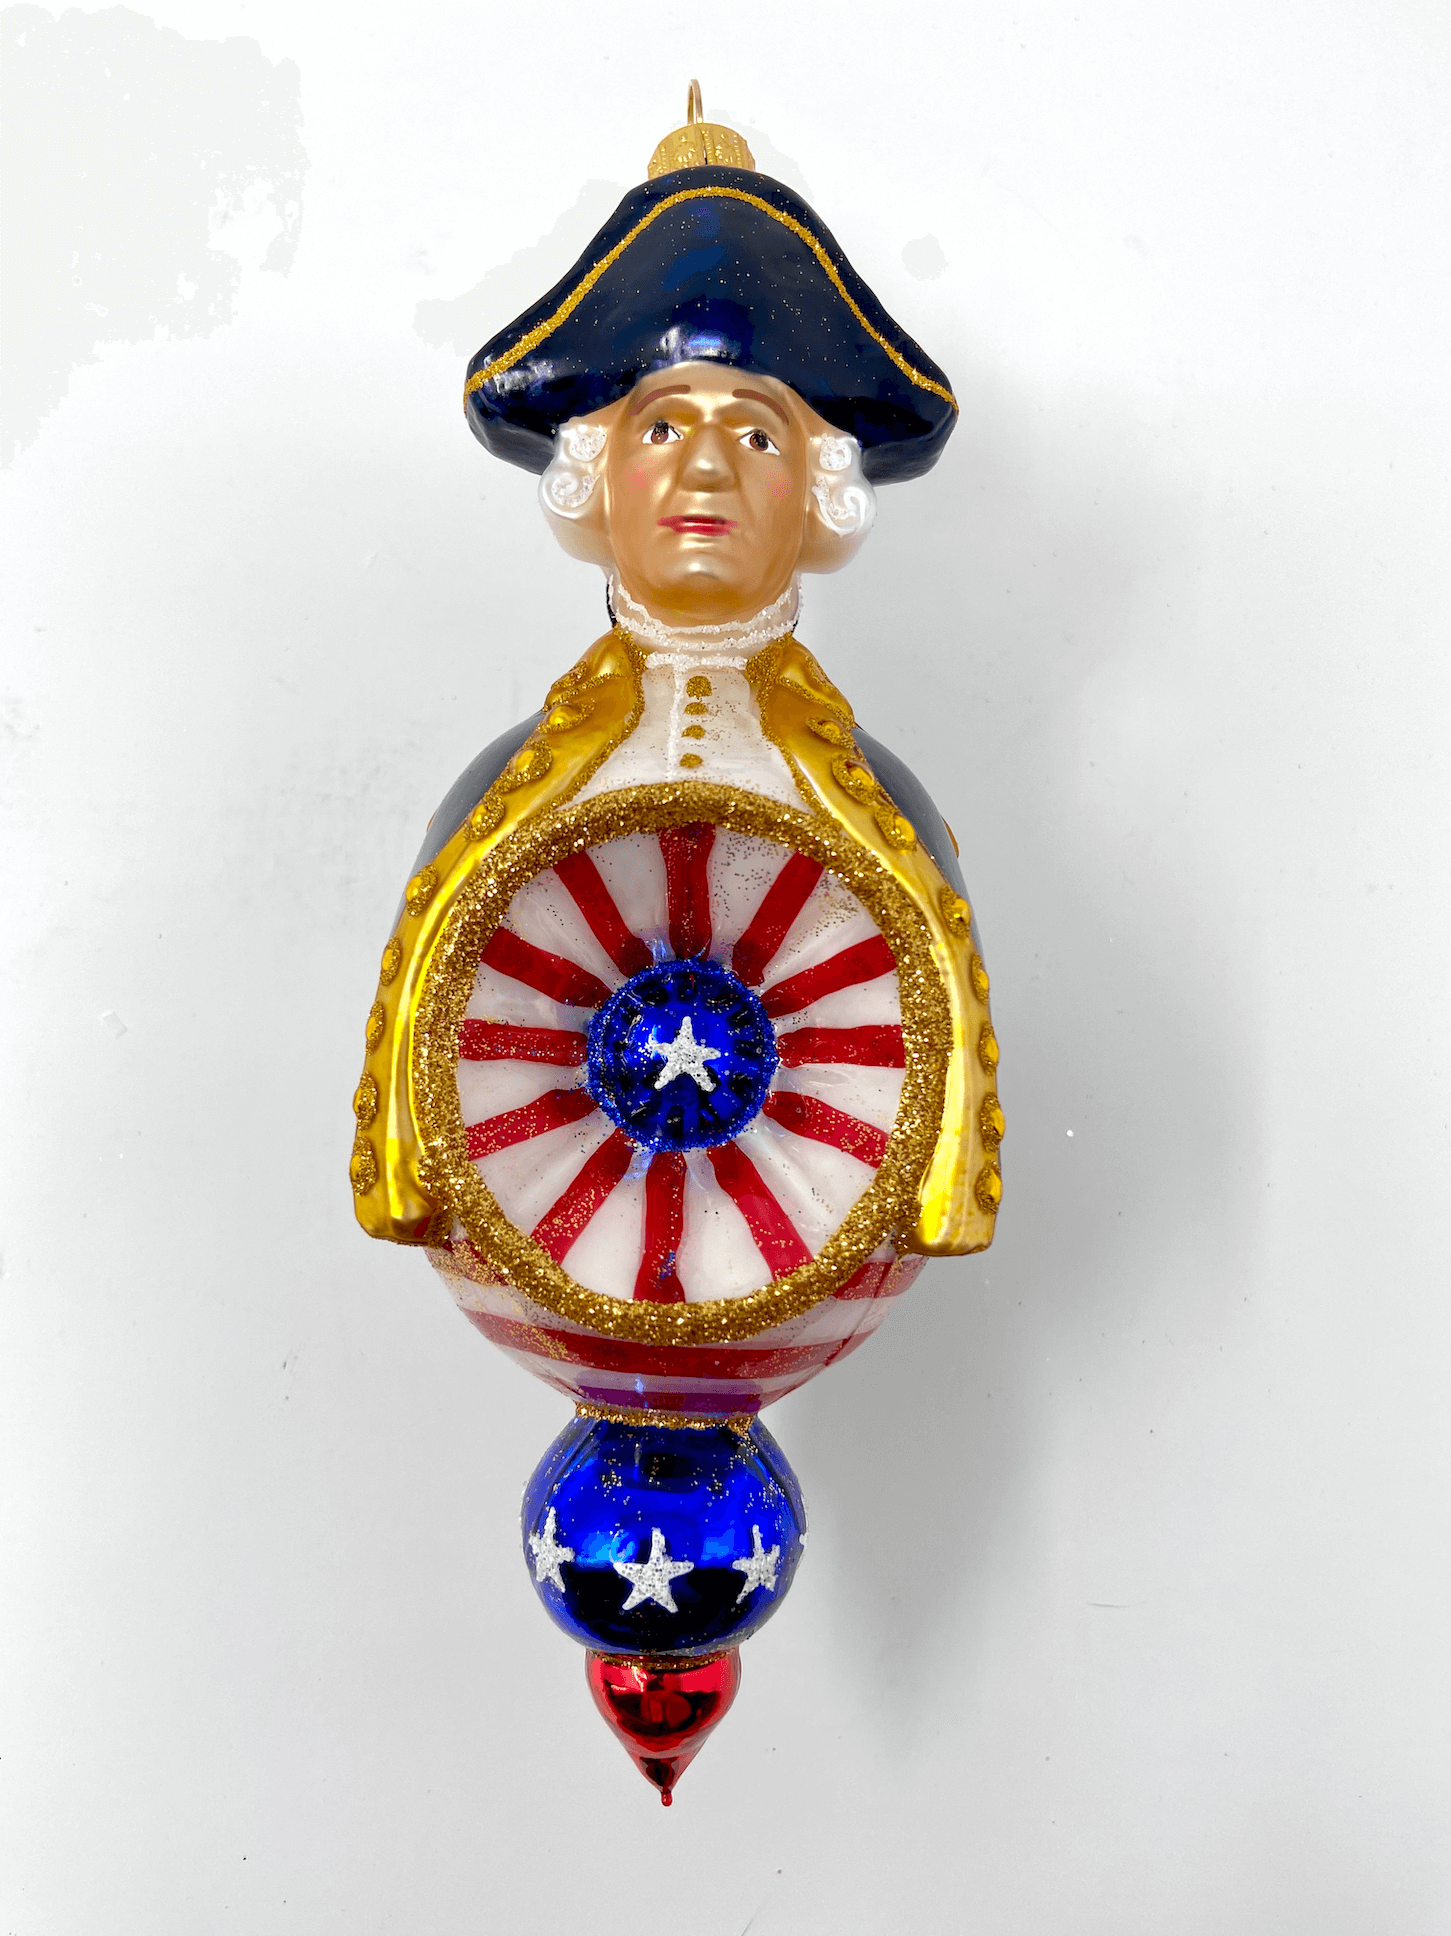 Beautiful George Washington reflector ornament wearing a black cloak and colonial hat with red white and blue patriotic detailing. Polish glass christmas ornaments in saturated colors.